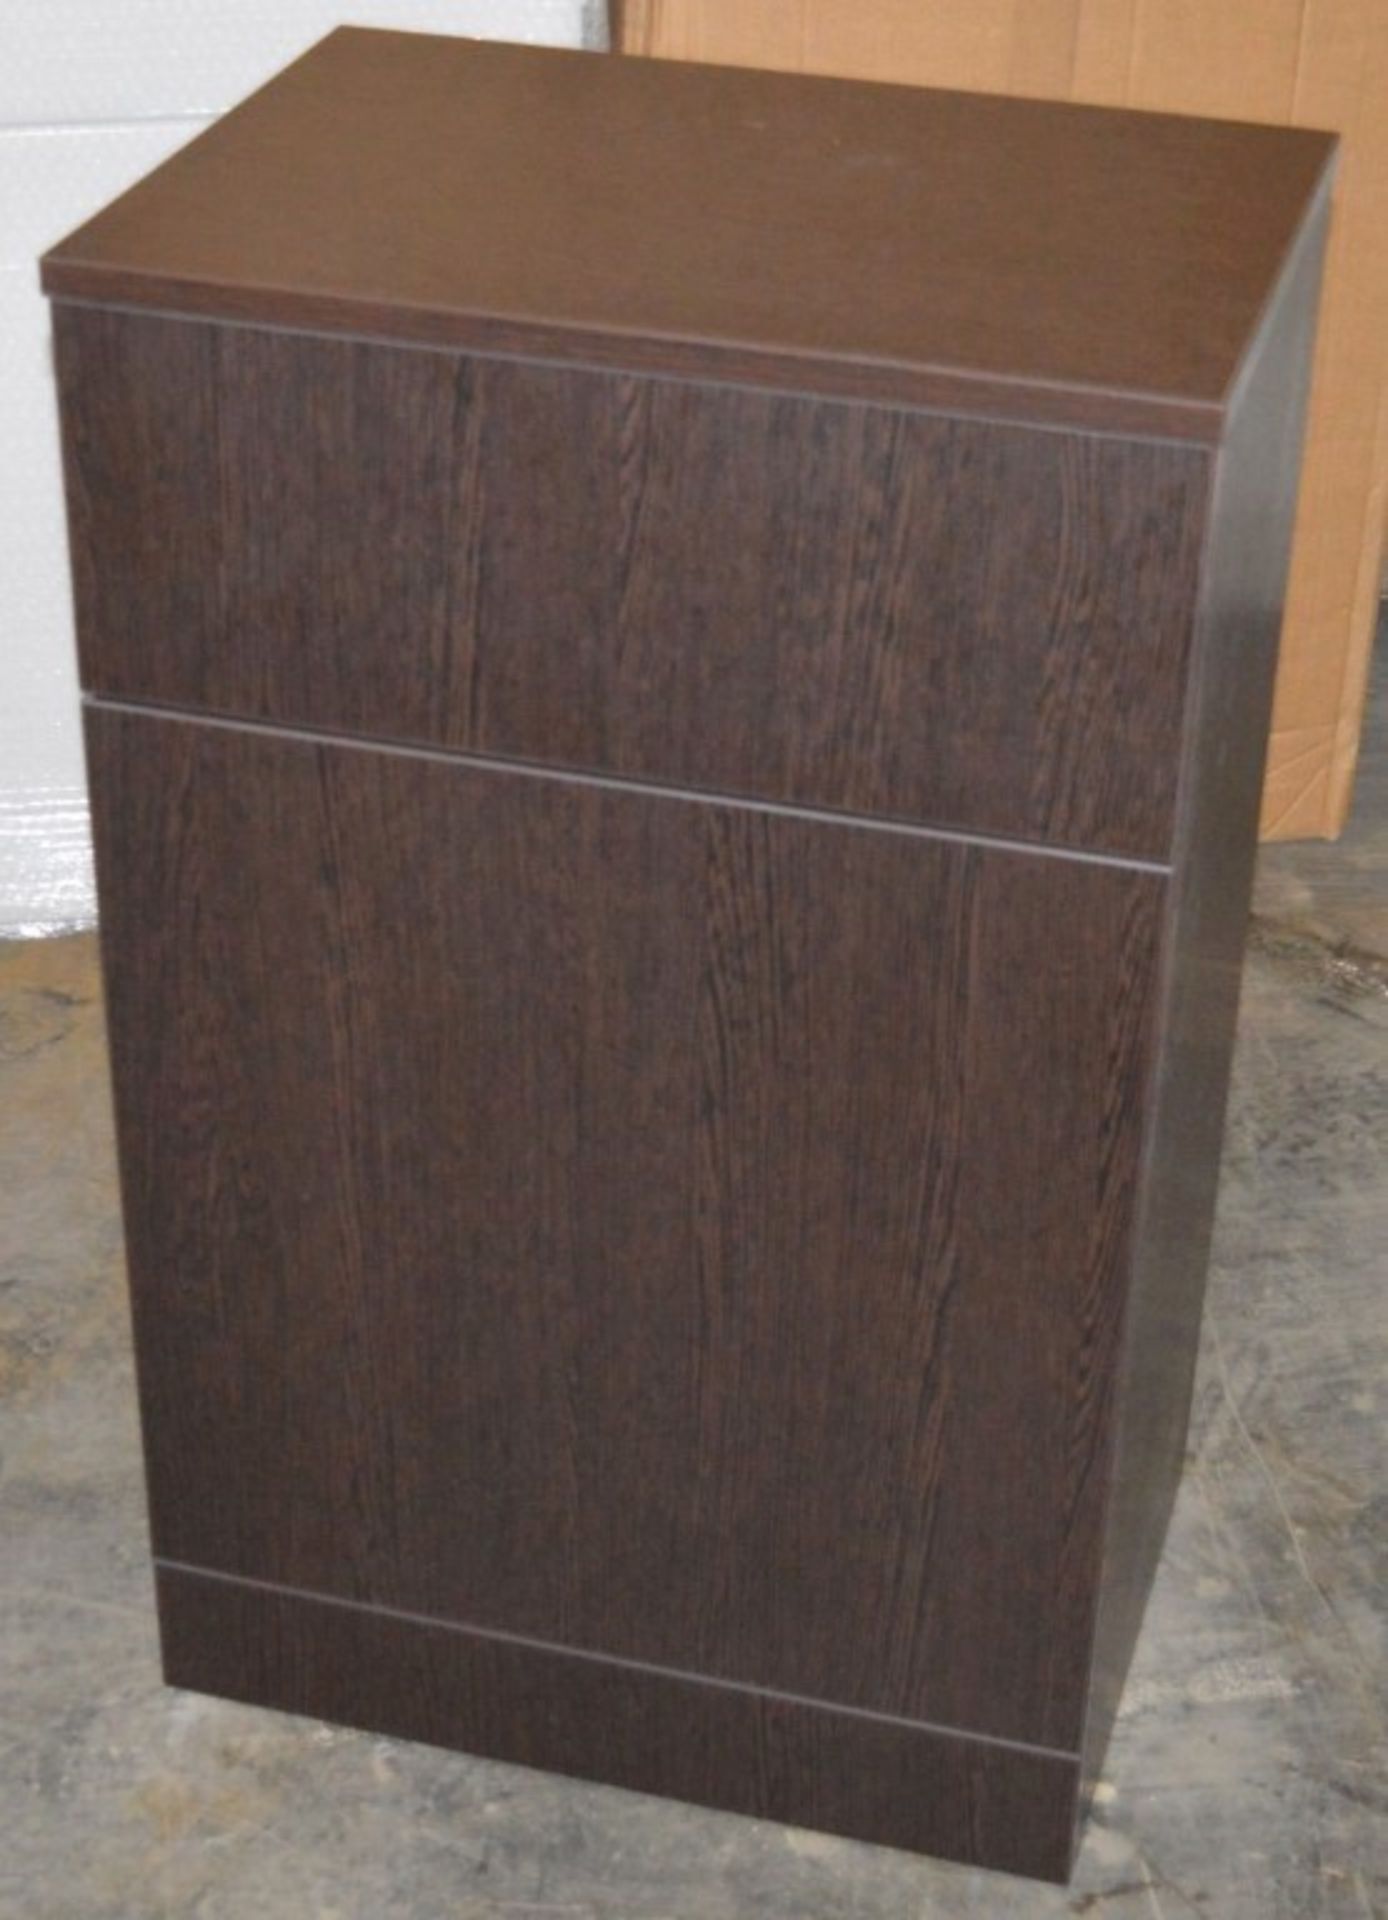 1 x Venizia BTW Toilet Pan Unit in Wenge With Concealed Cistern - 500mm Width - Brand New Boxed - Image 4 of 6